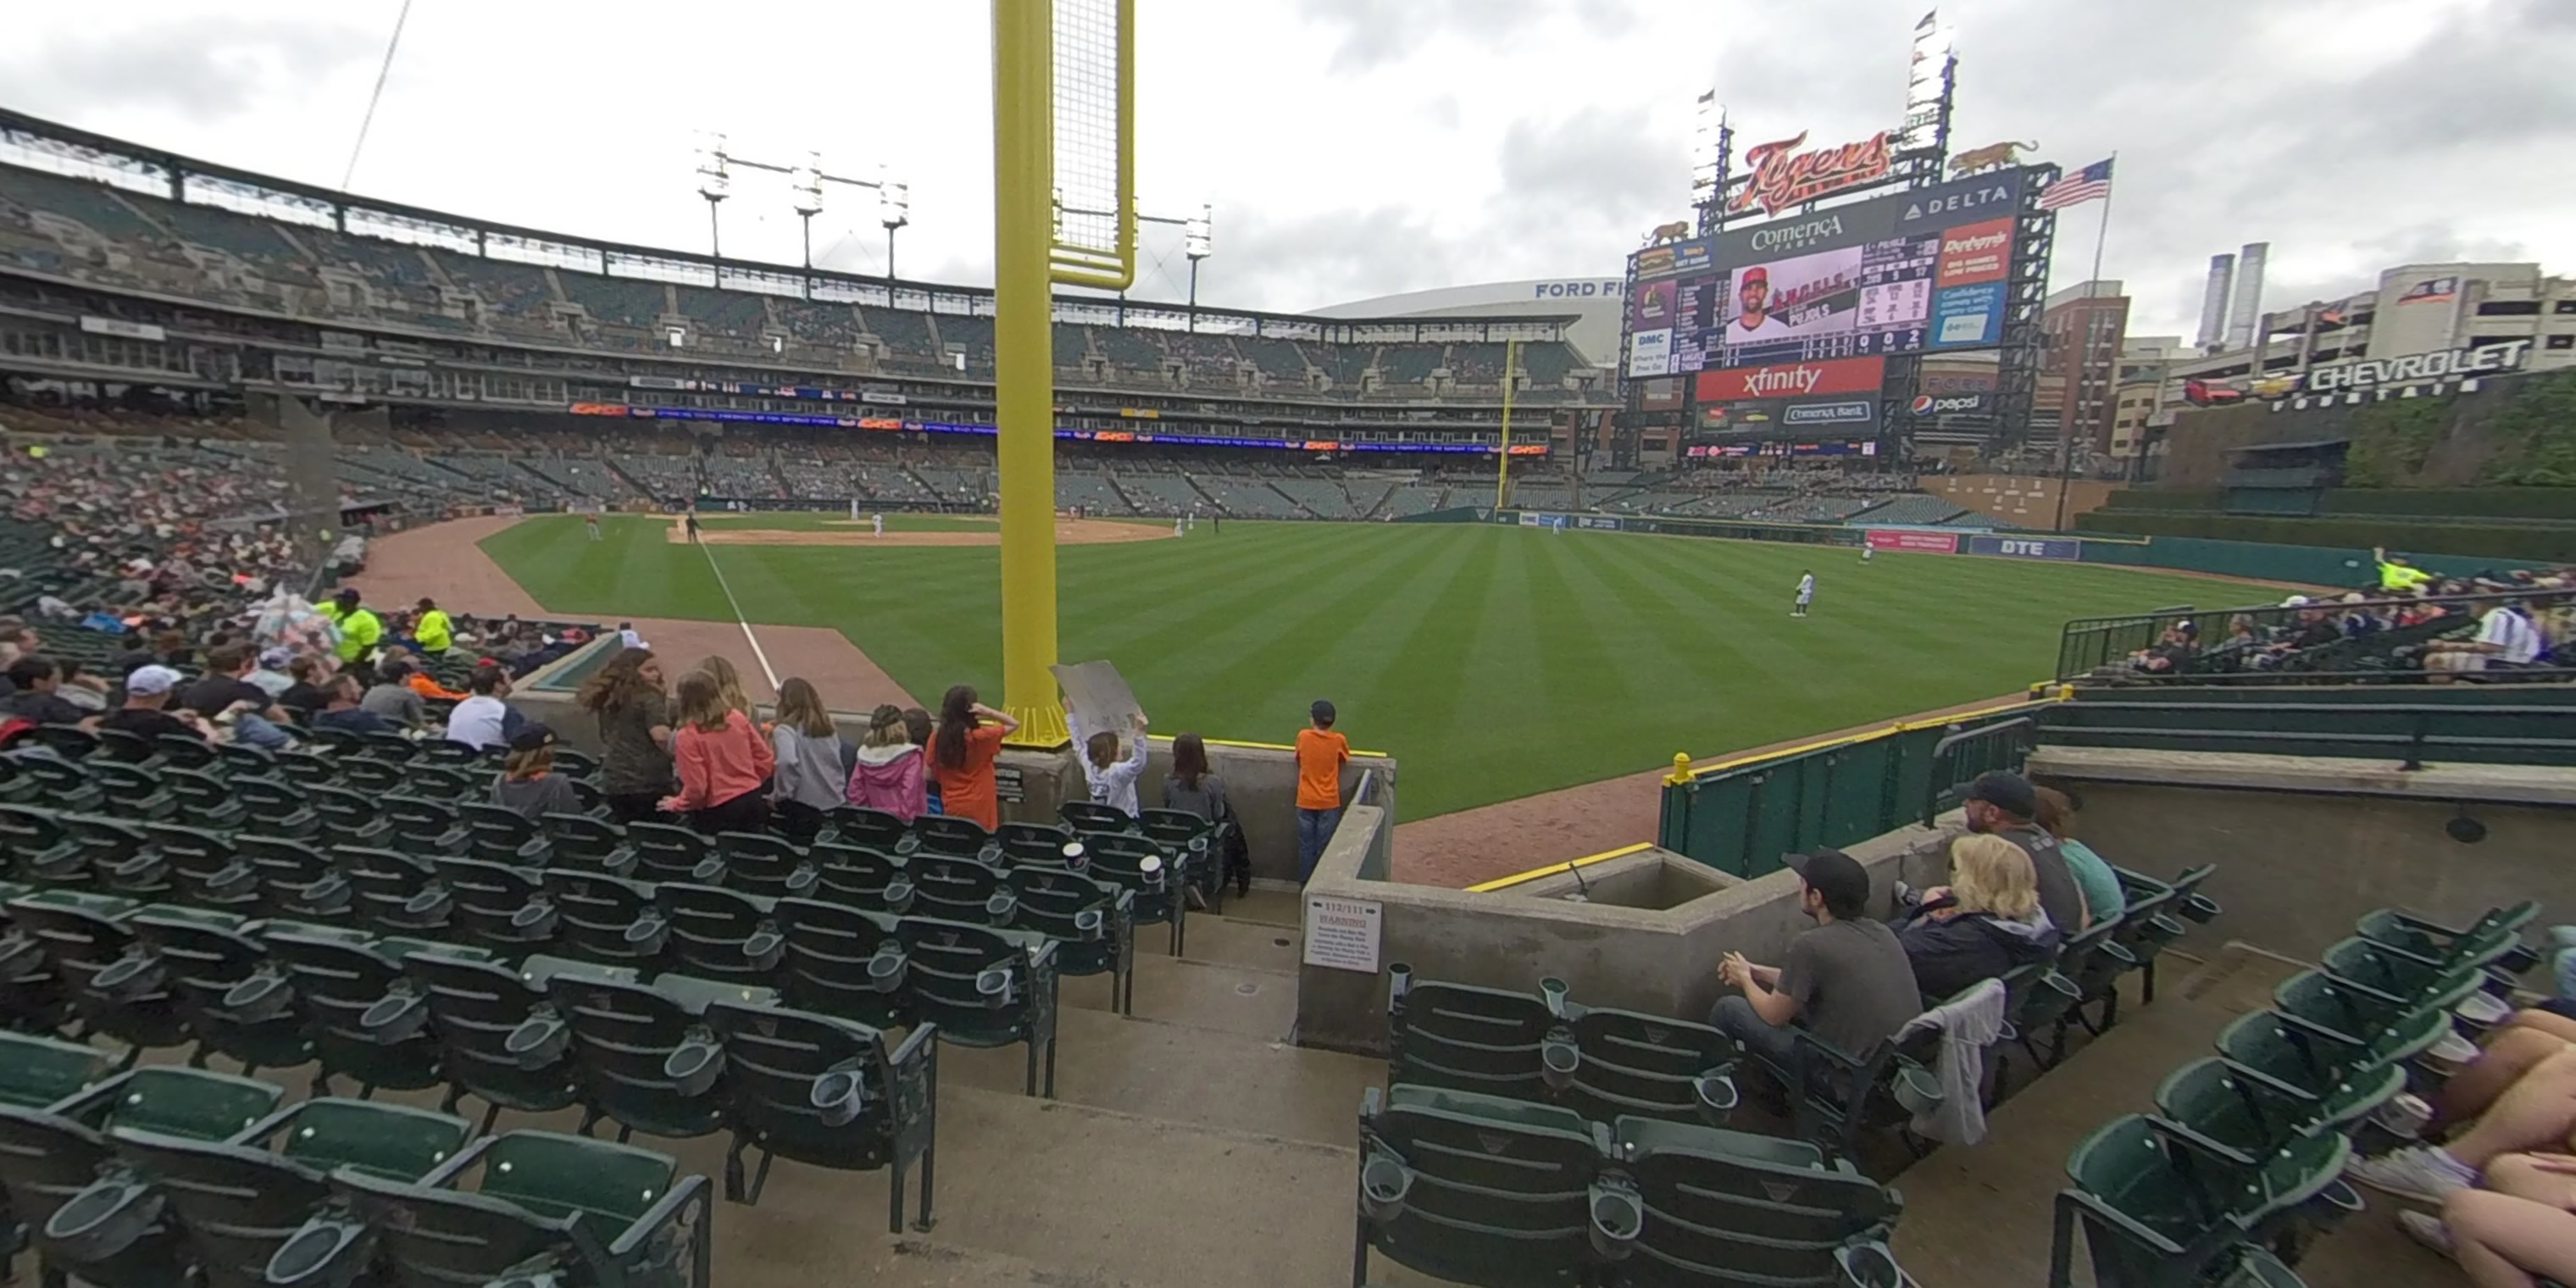 section 111 panoramic seat view  for baseball - comerica park